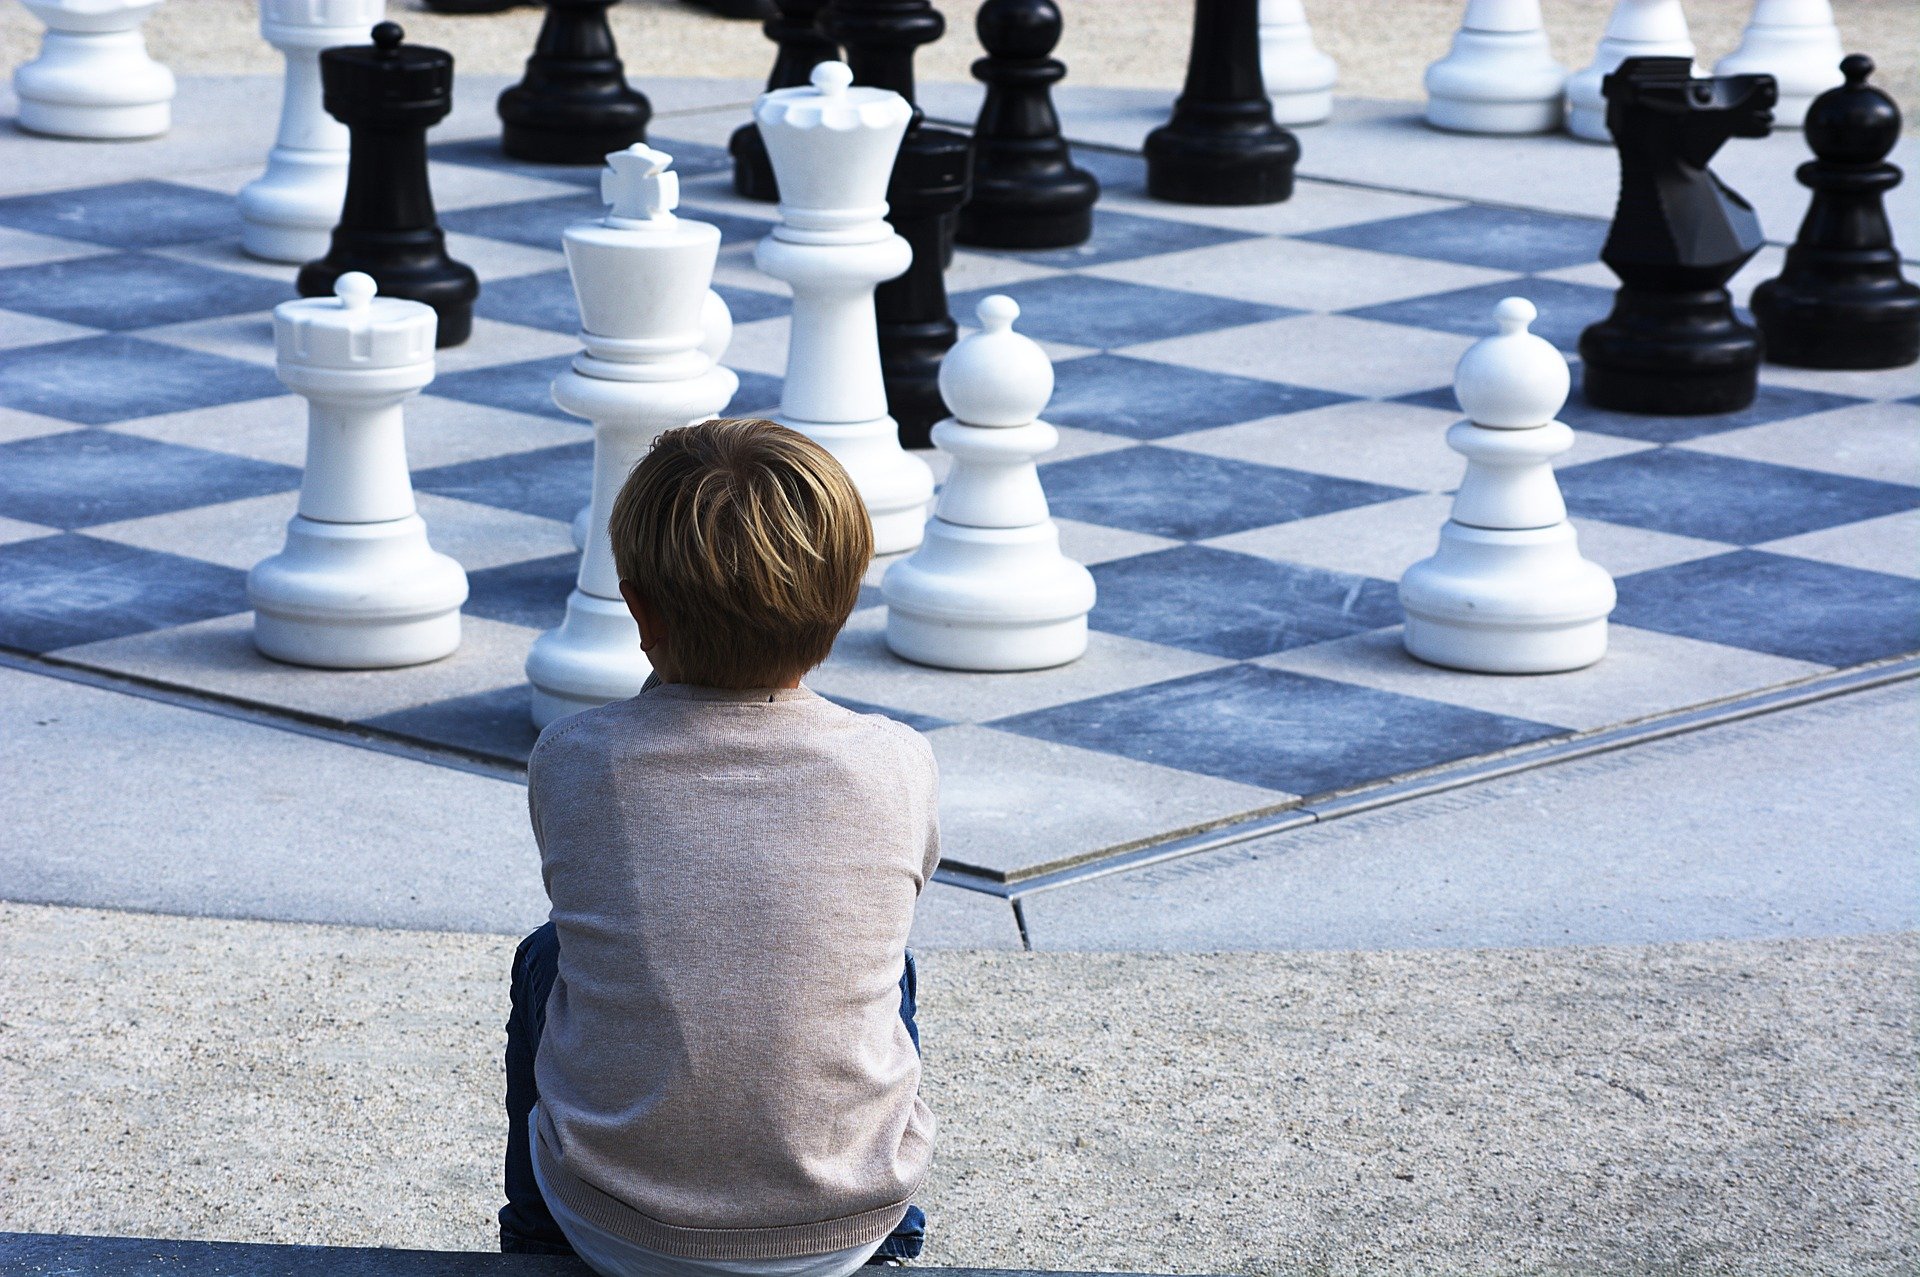 Pictured - A young boy sits and looks over at a chess landscape | Source: Pixabay 